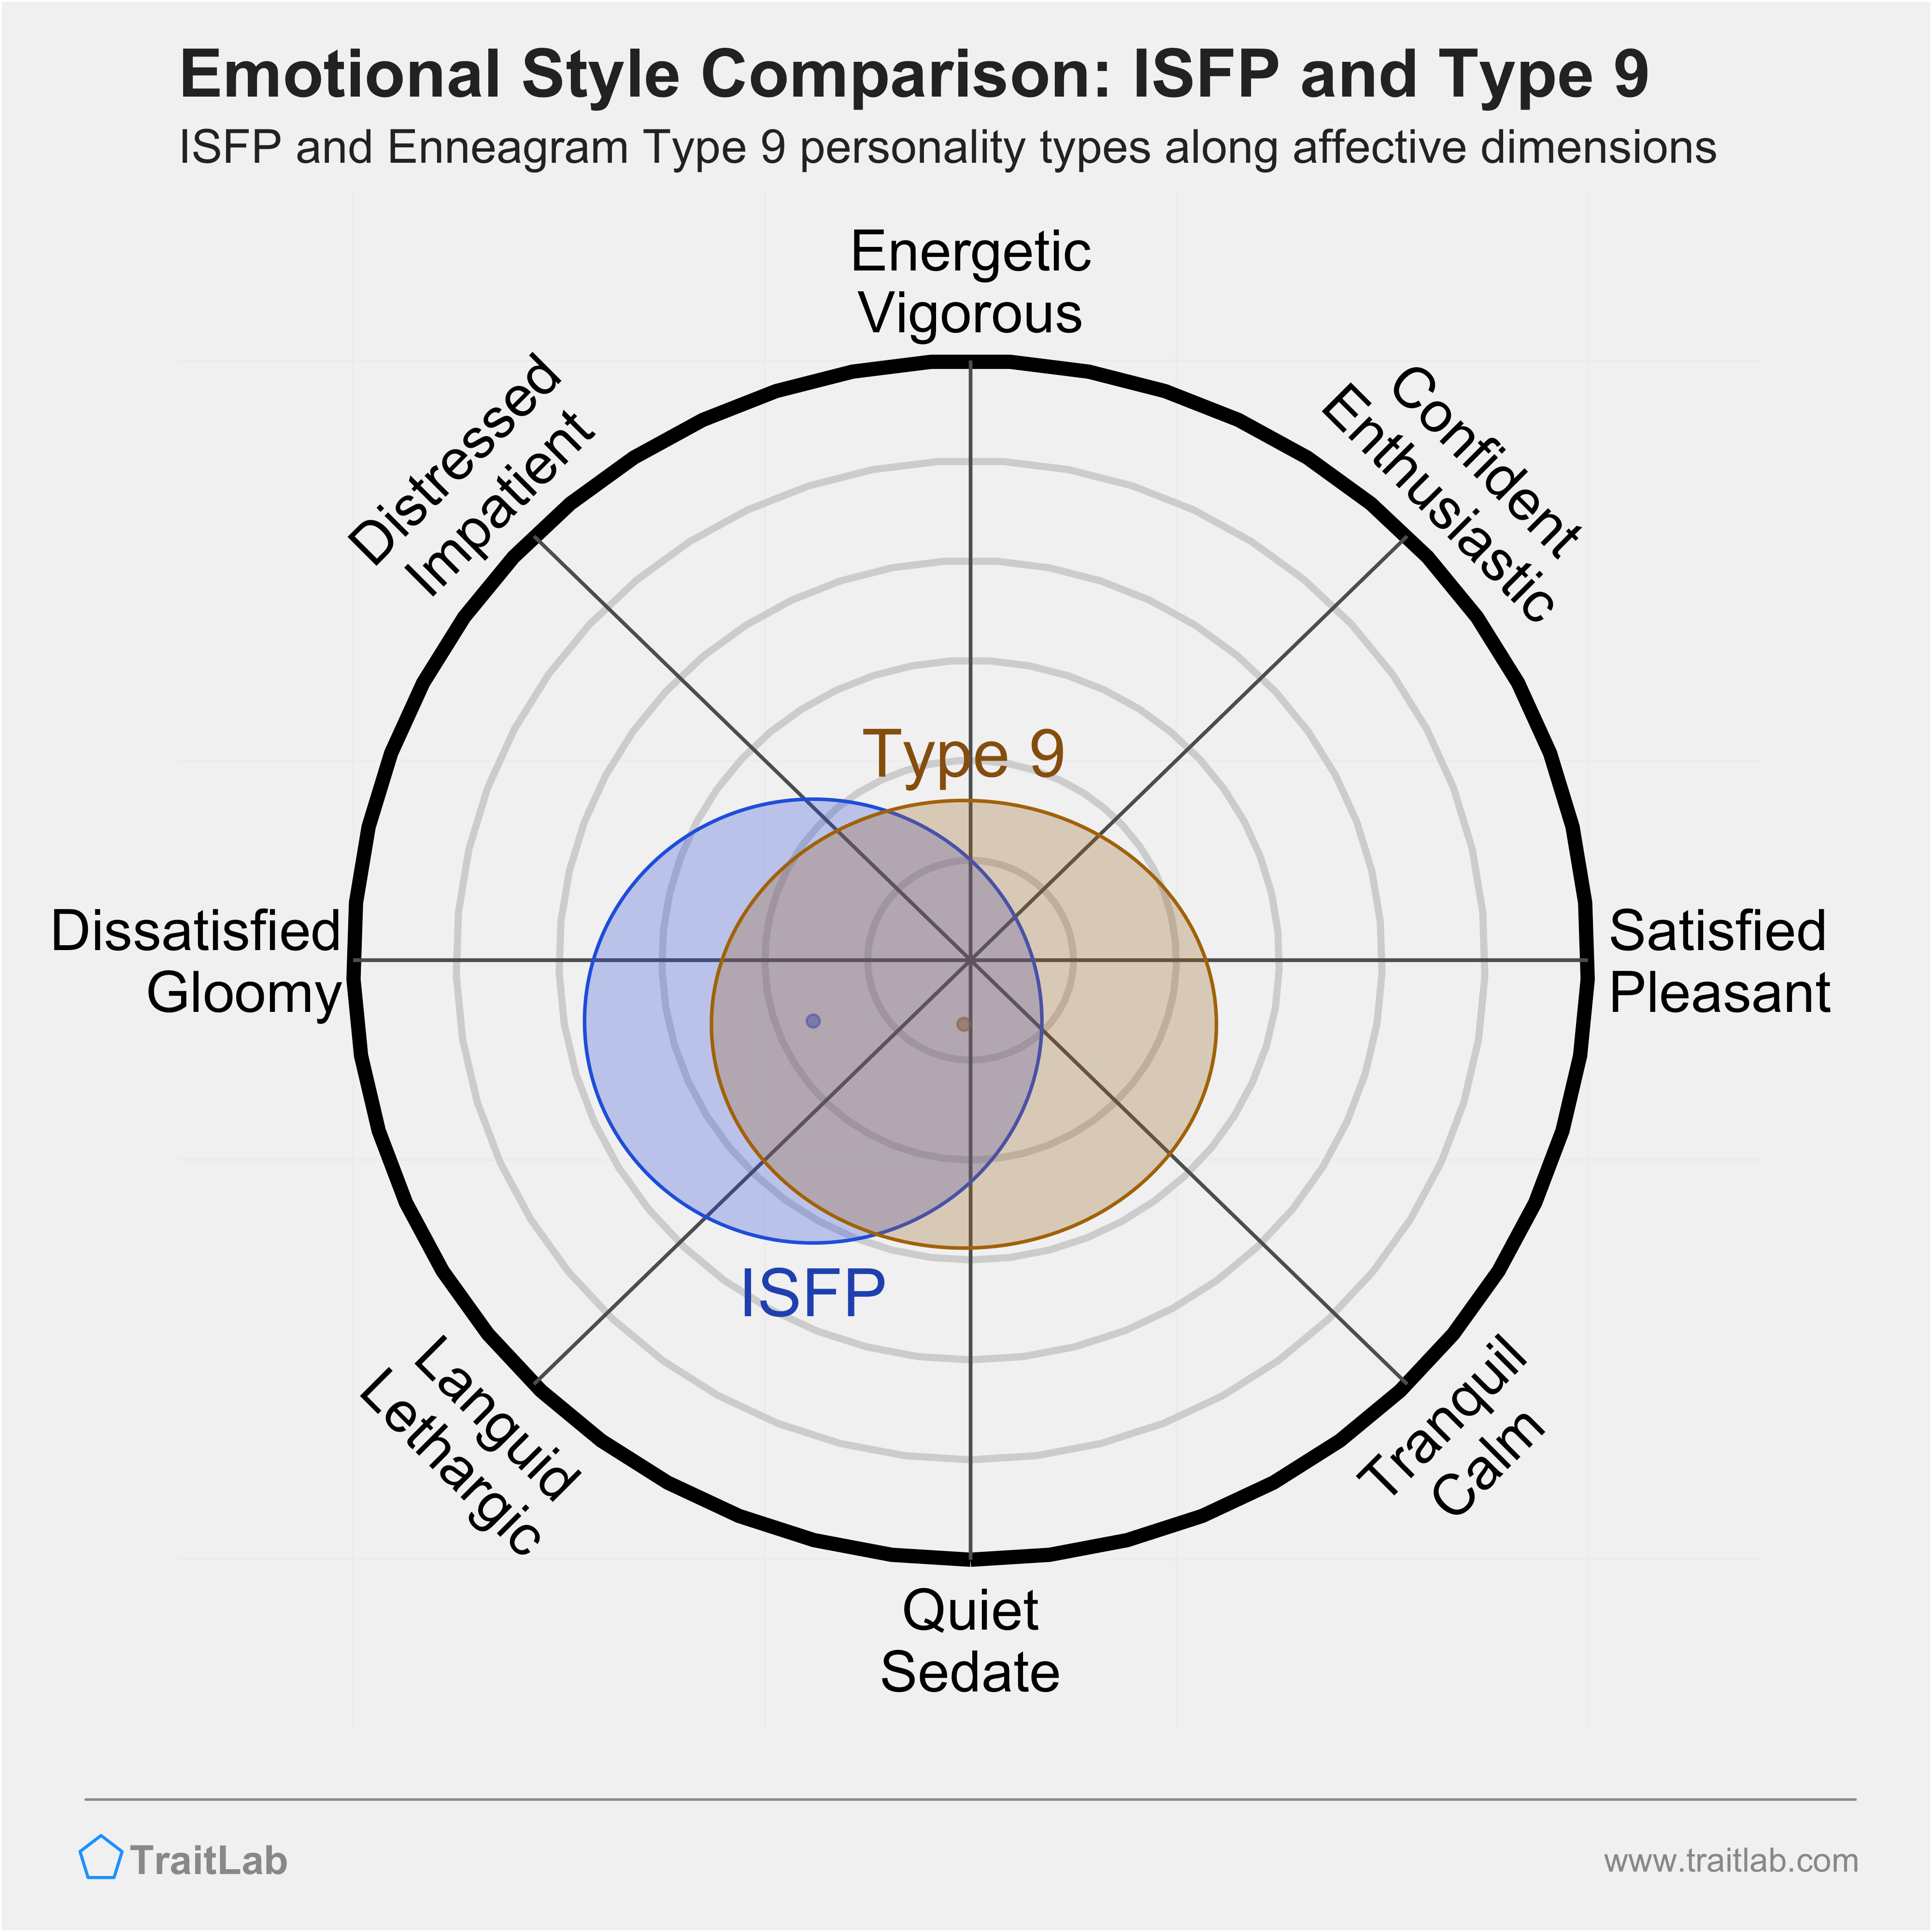 ISFP and Type 9 comparison across emotional (affective) dimensions